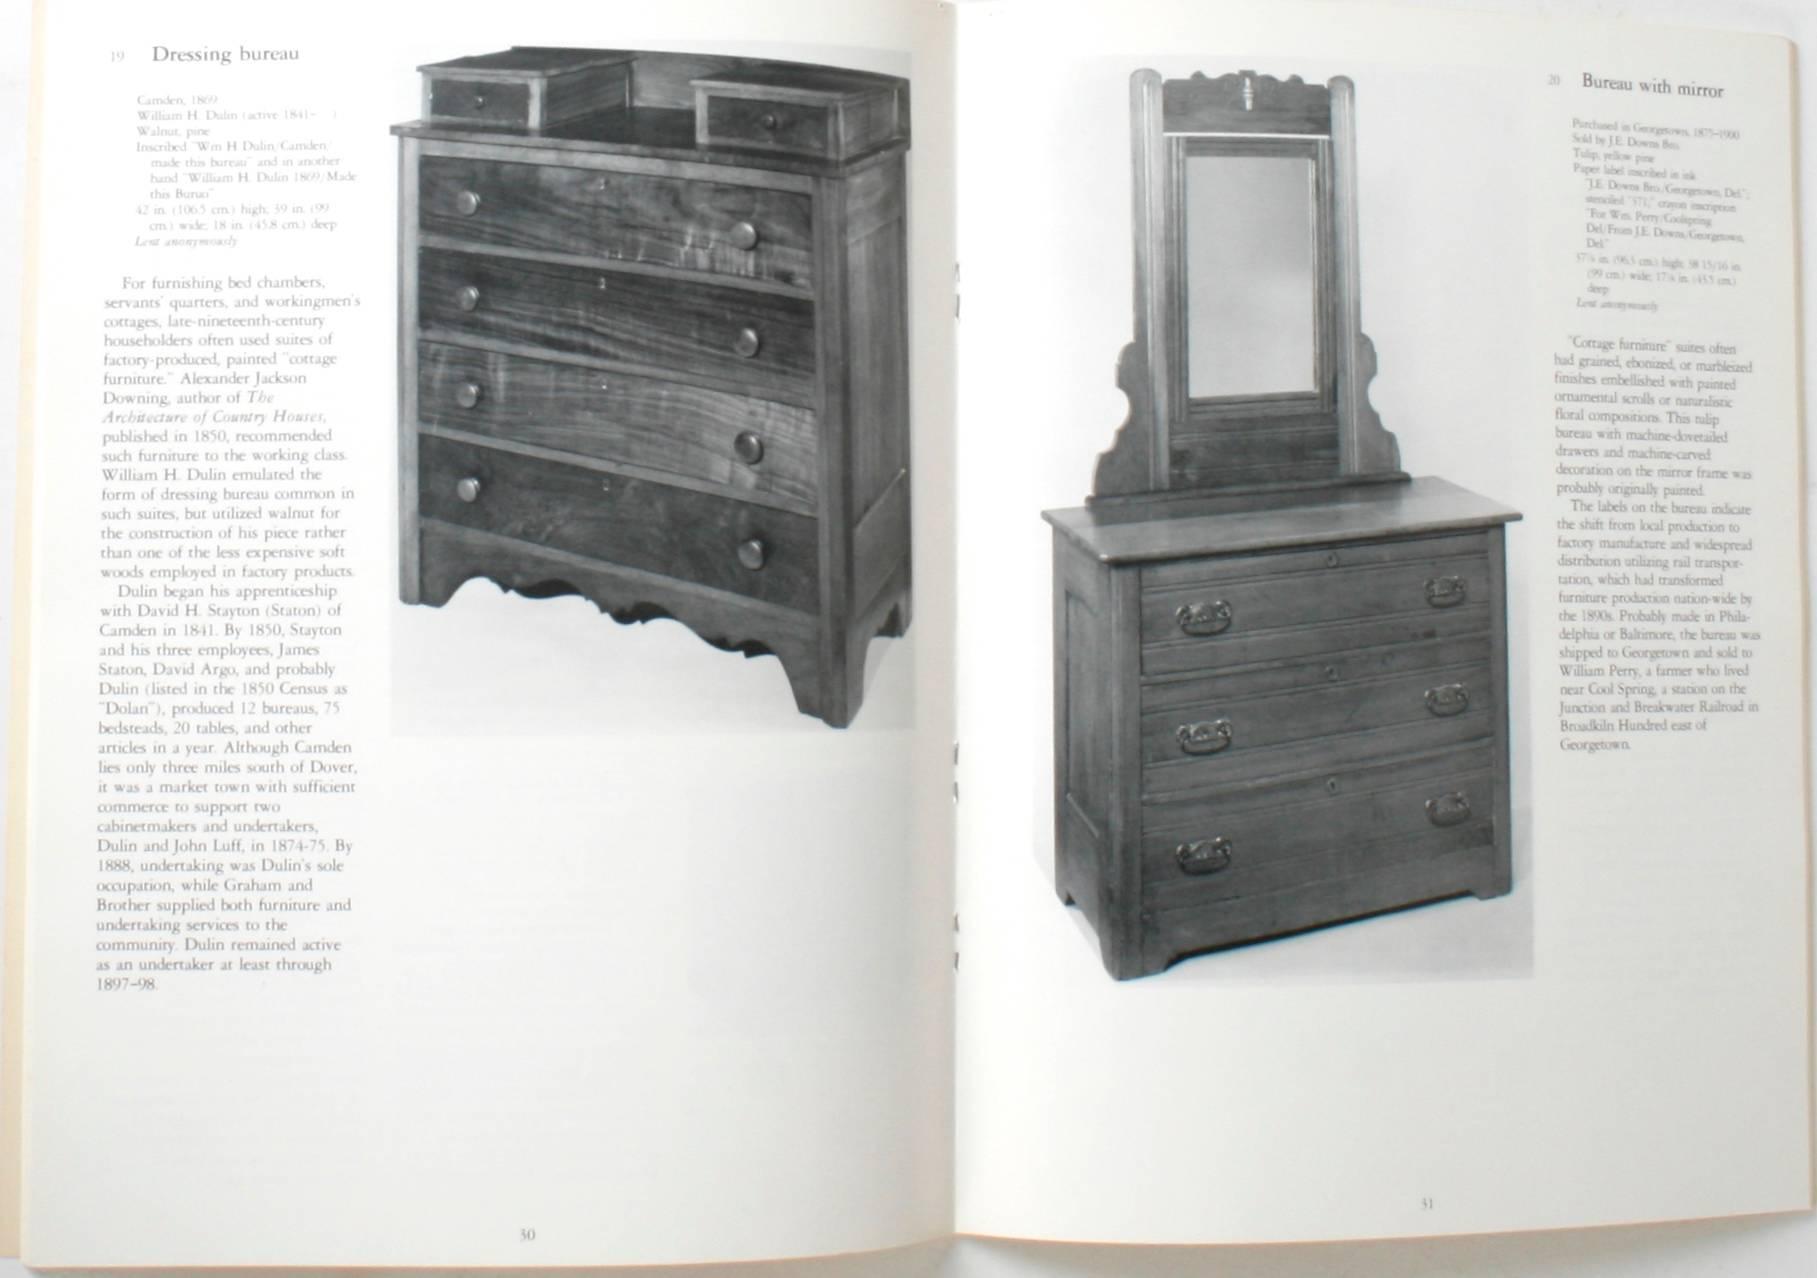 Plain and Ornamental: Delaware Furniture 1740-1890. Wilmington: The Historical Society of Delaware, 1984. First edition soft cover. 60 pp. A catalogue from an exhibition of antique furniture made in Delaware between 1740 and 1890. The exhibit was